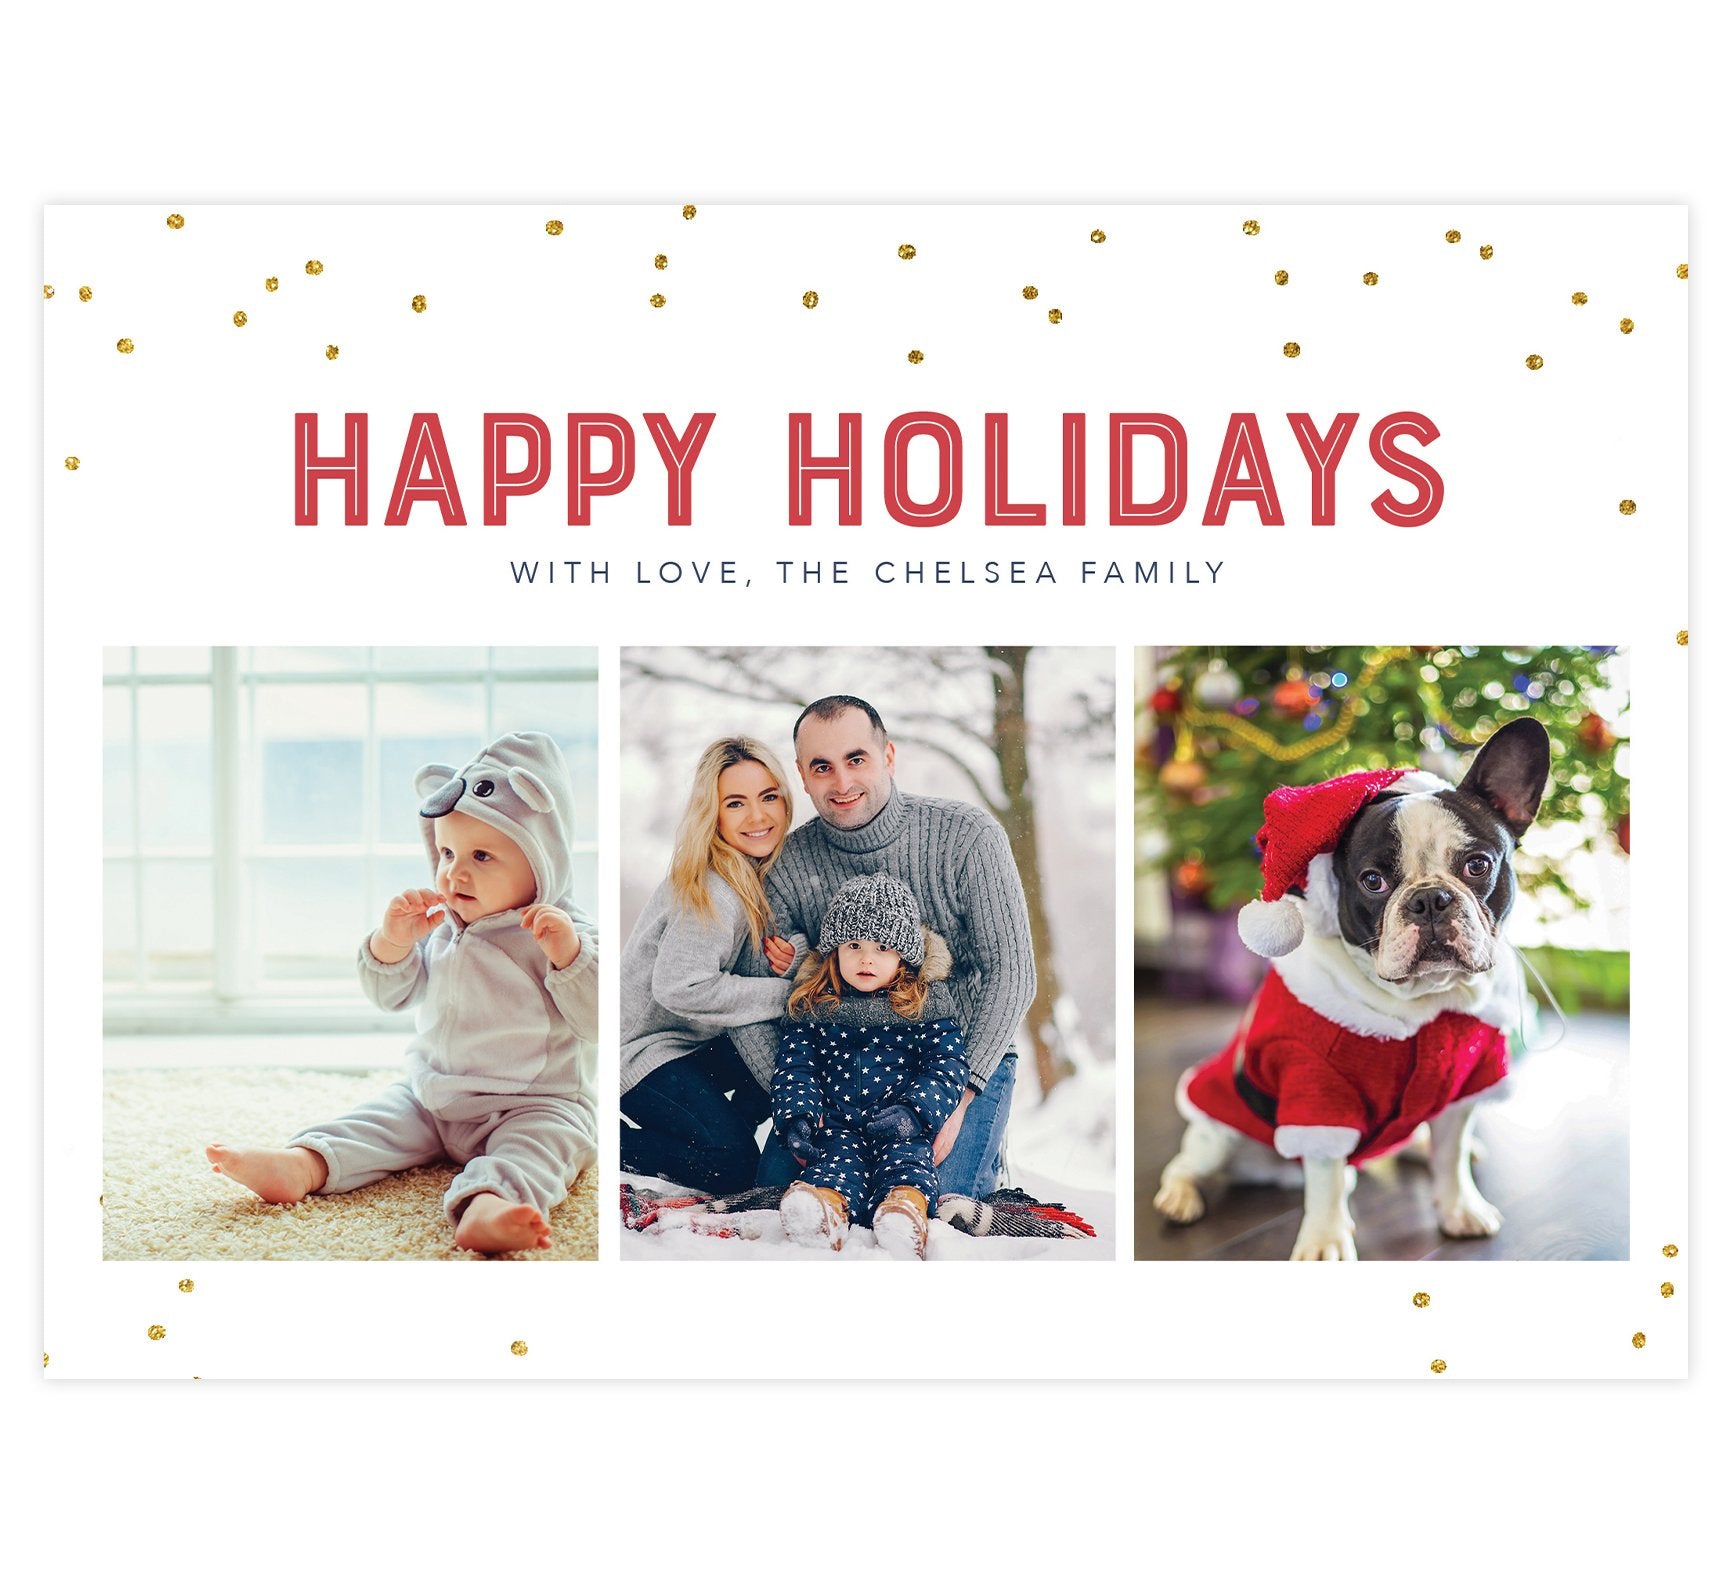 Glitter Dots Holiday Card; White background with glitter dots around the edges, red "Happy Holidays" above 3 image spots.